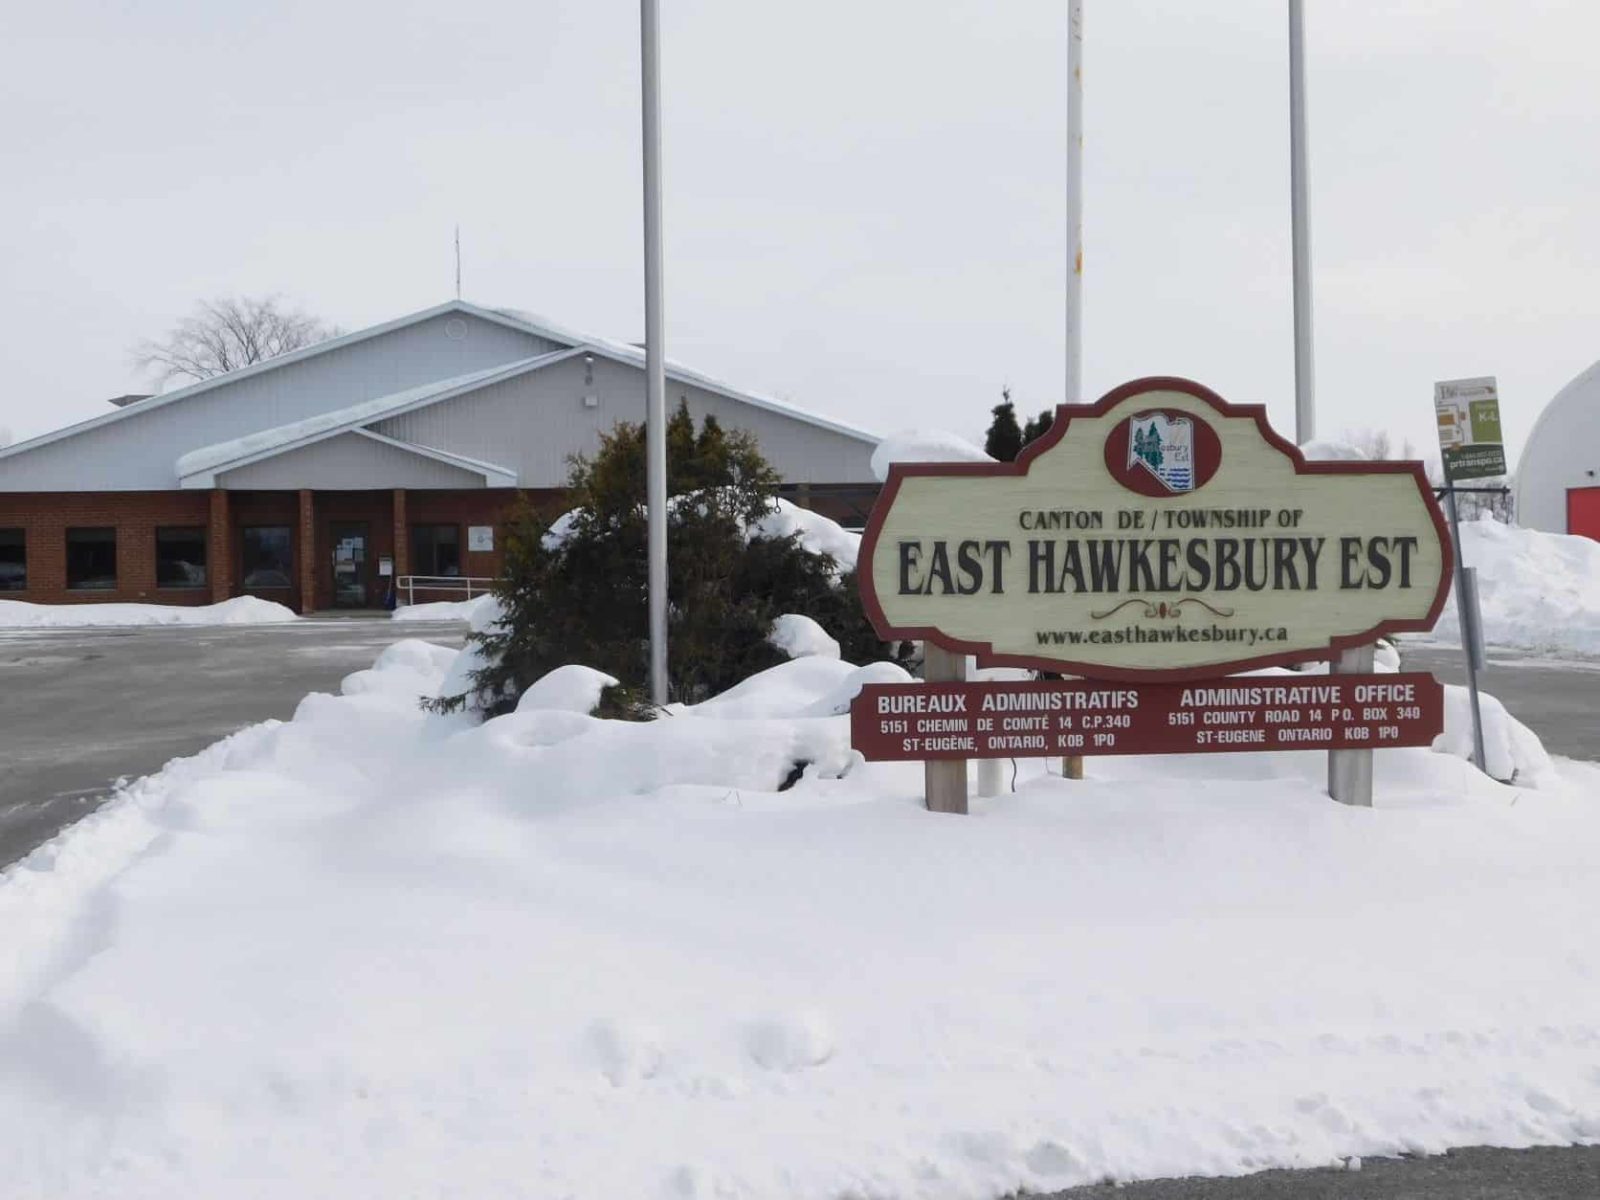 New stipend rates for East Hawkesbury council